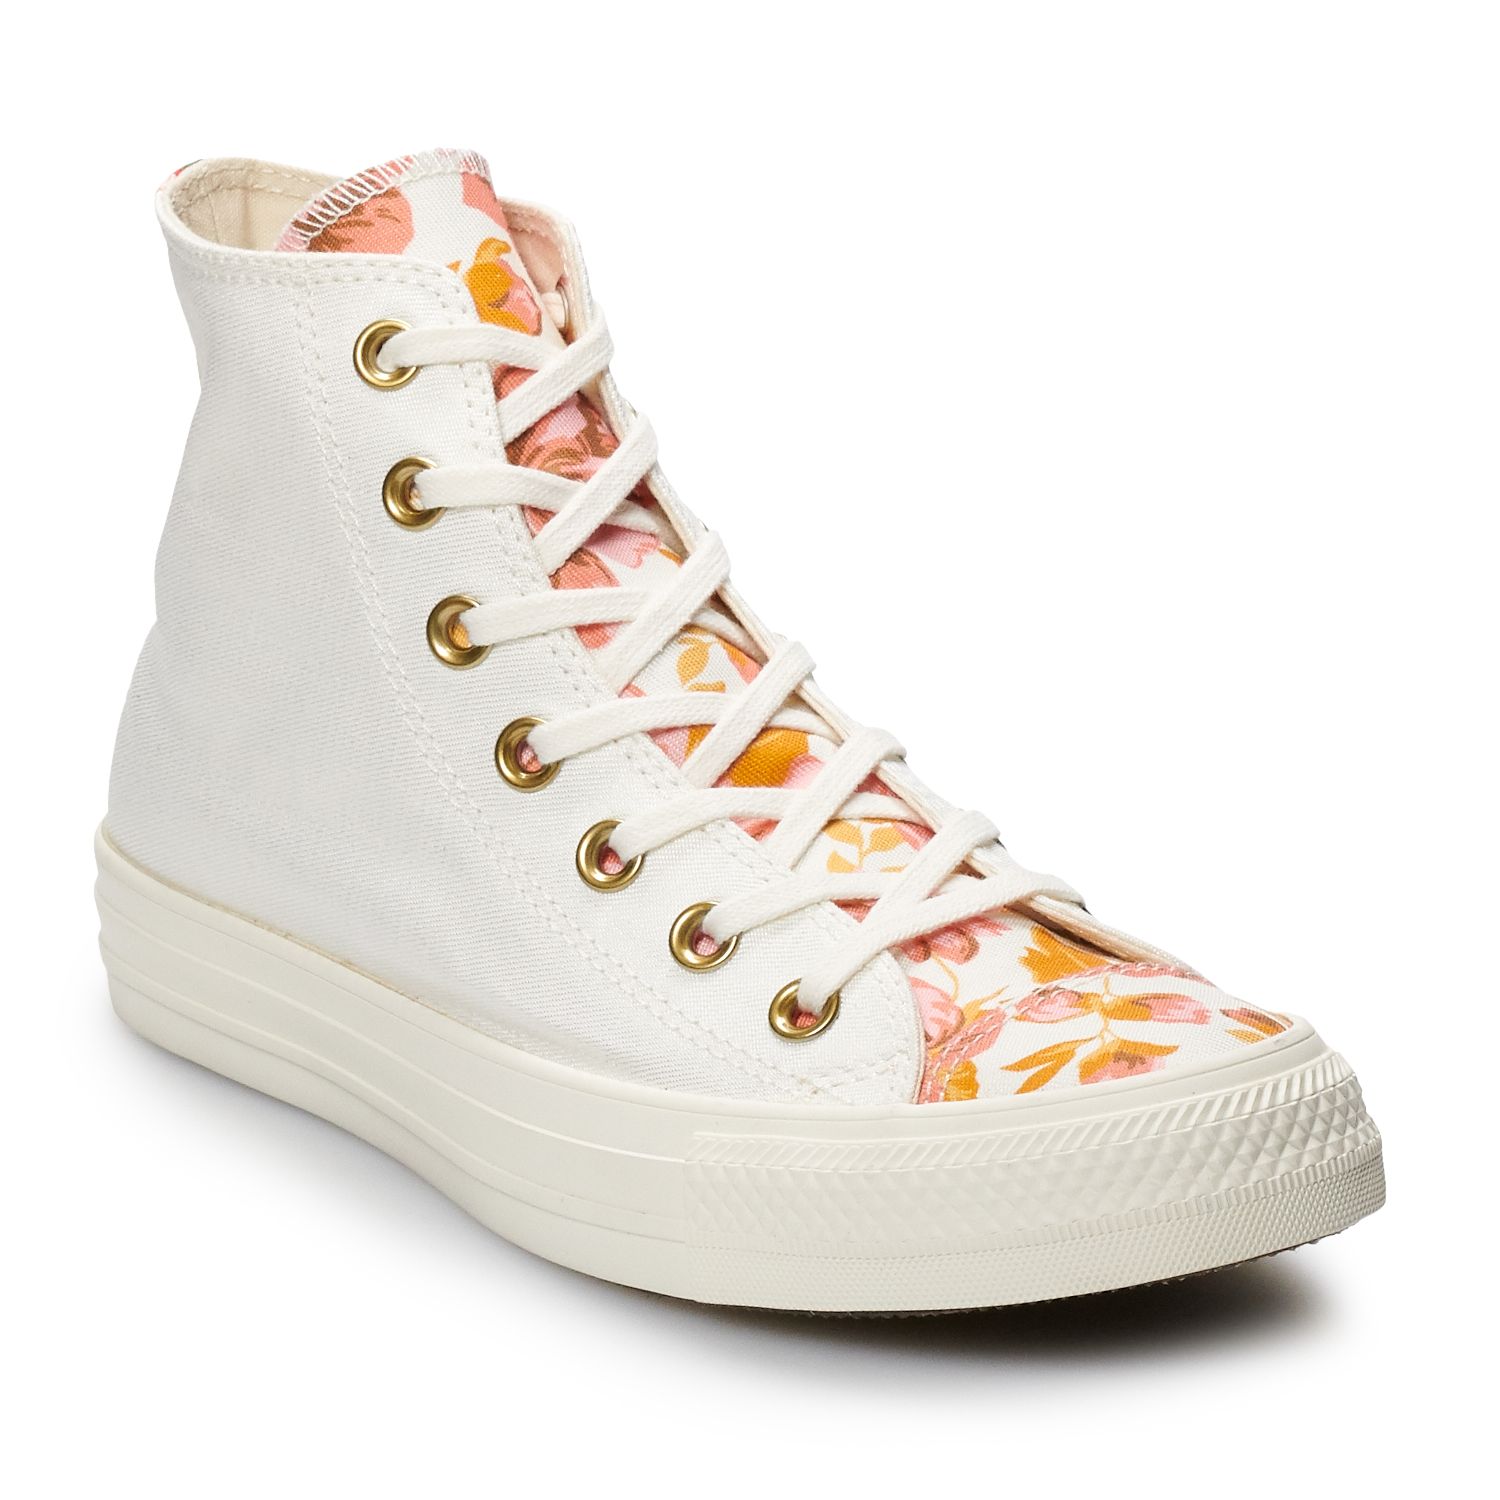 floral high tops